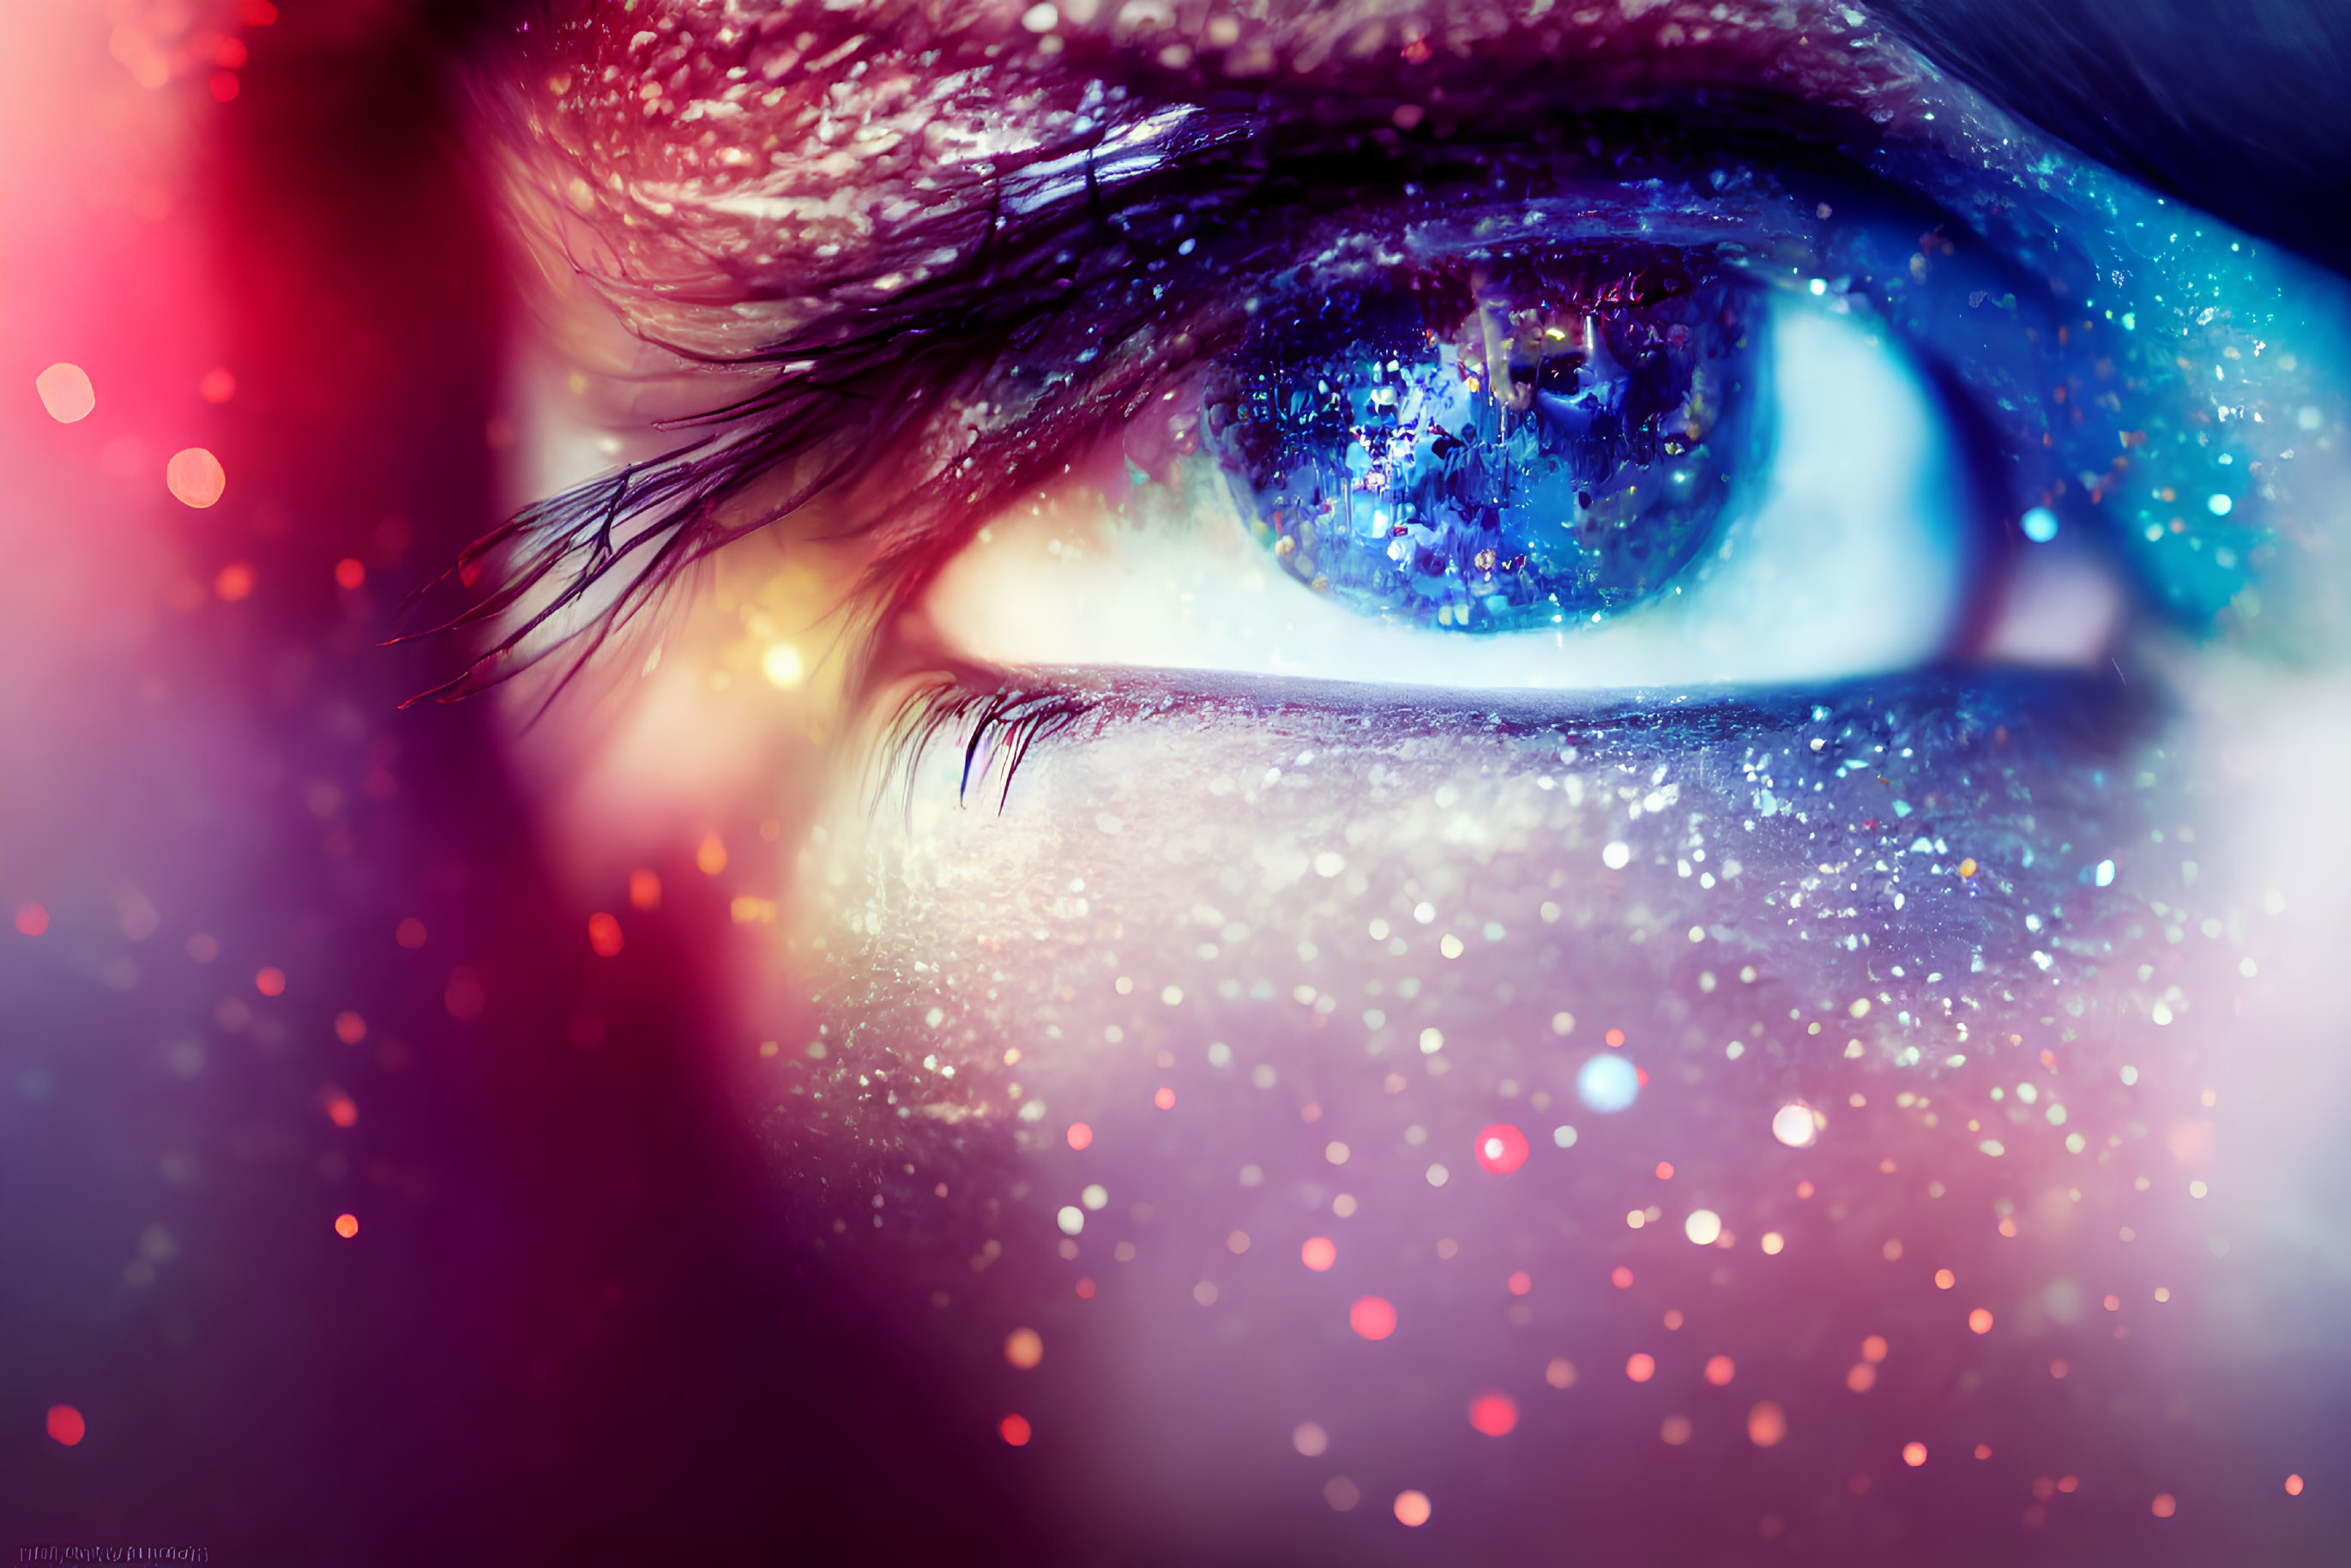 Vividly colored eye with sparkles and blue hues in dreamy close-up